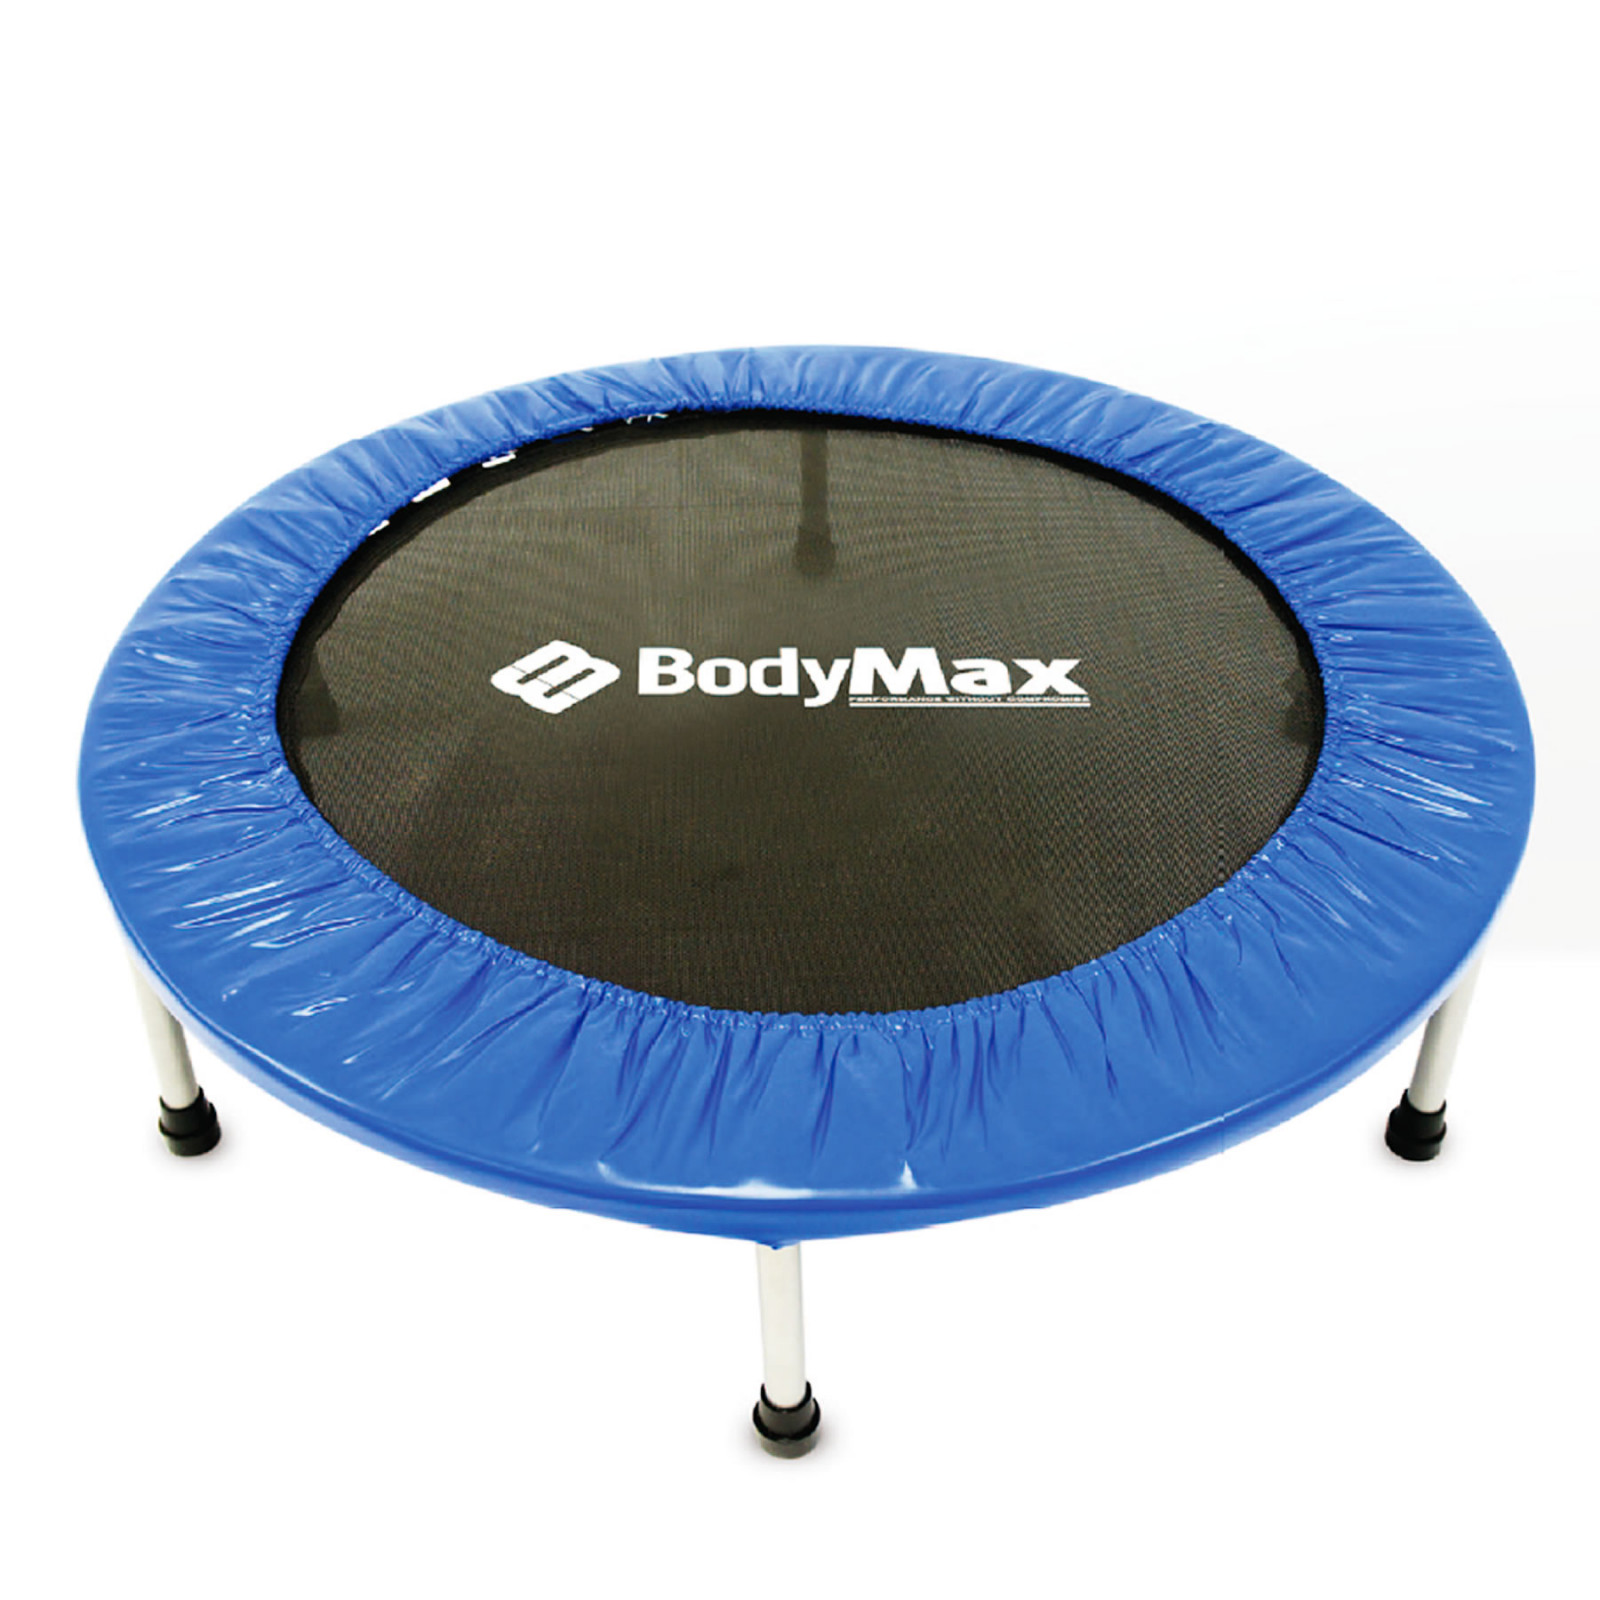 Binxin Rebounder Trampoline Folding Mini Trampoline with Adjustable Handle Bar Exercise Fitness Trampoline for Kids or Adults 